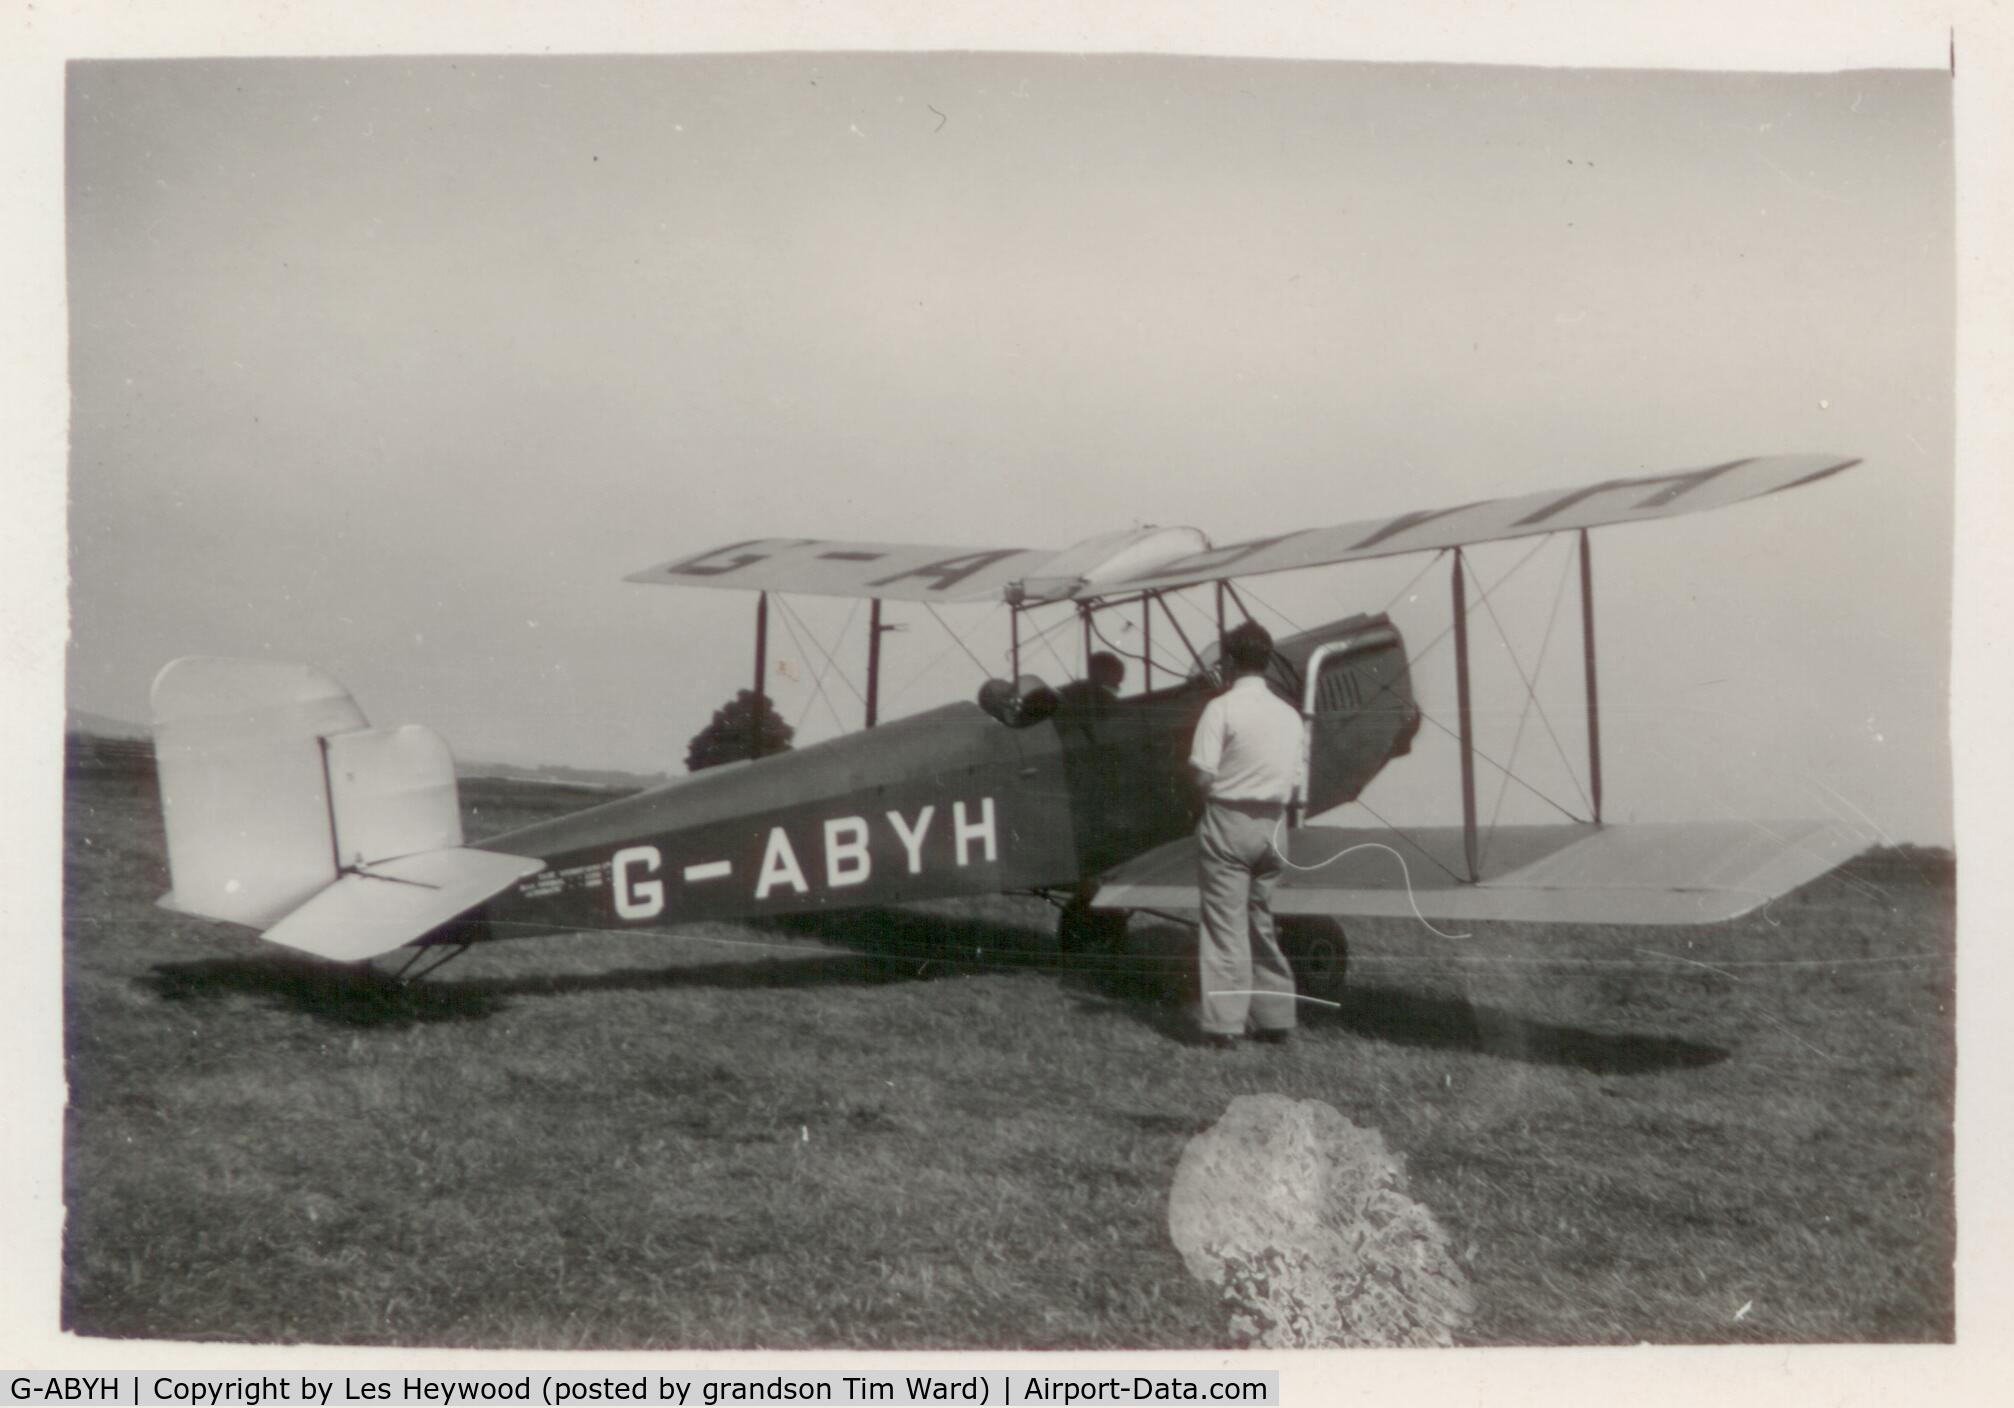 G-ABYH, 1934 Spartan Three Seater I C/N 71, Picture found in family collection. No idea when and where it was taken.